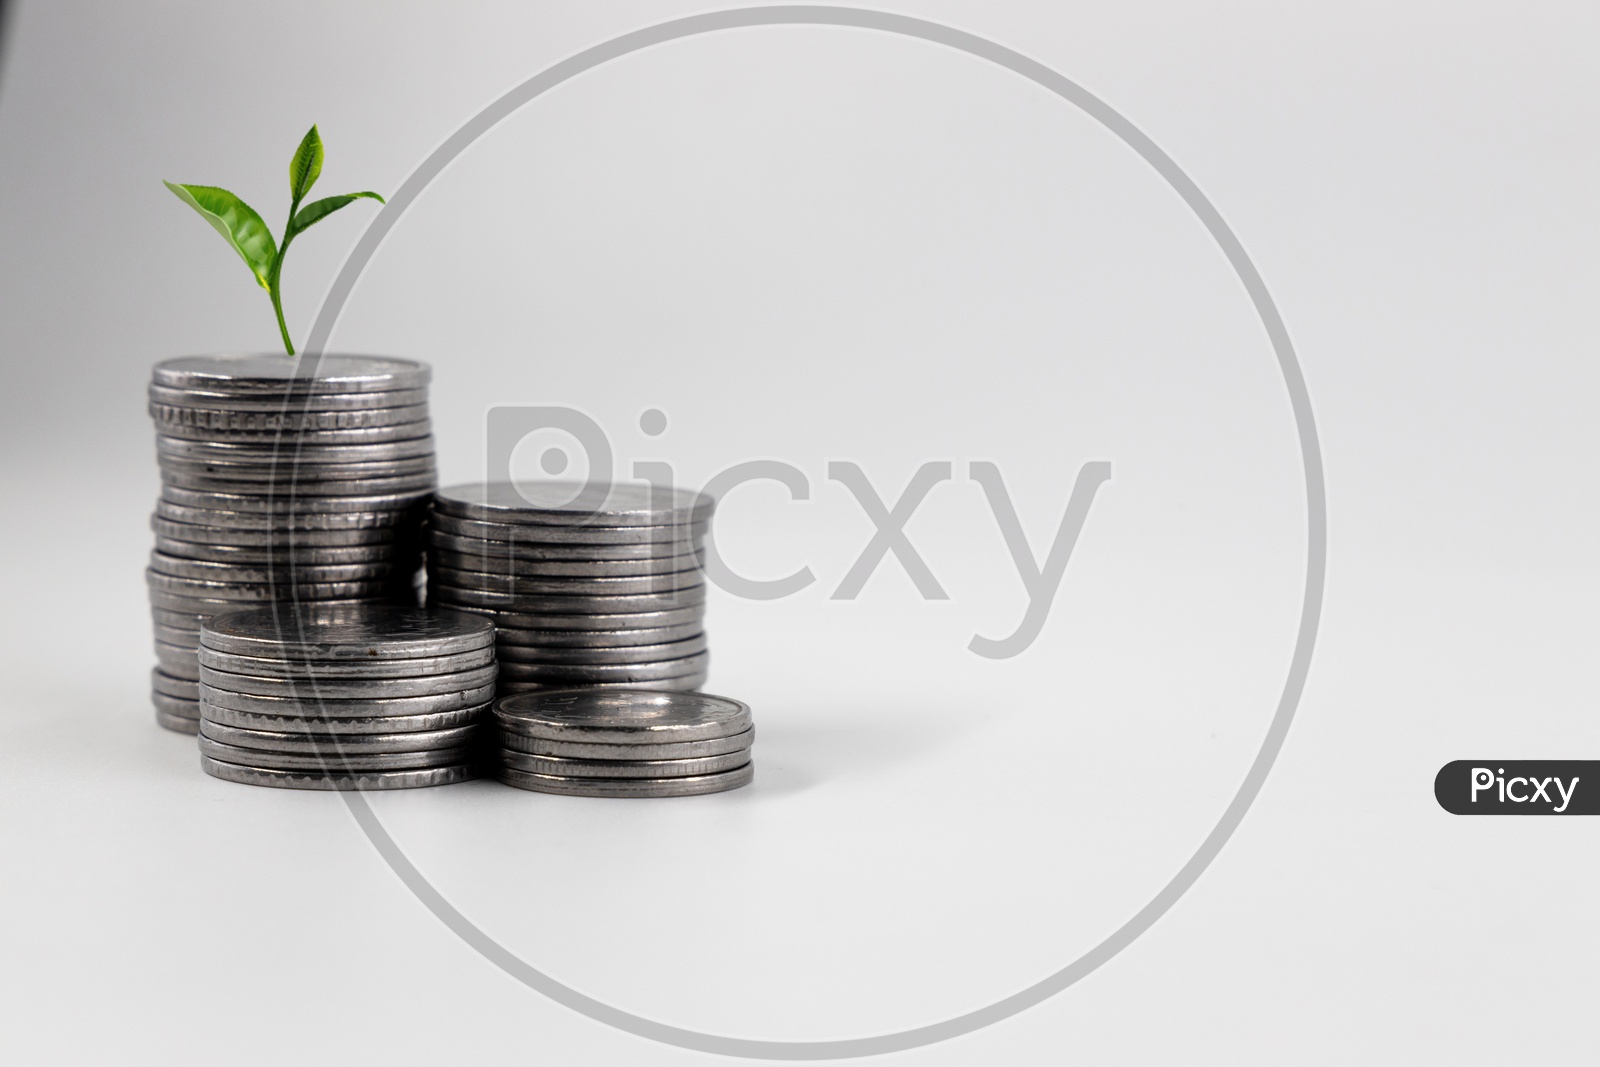 A Plant  On a Stack Of Currency Coins Growing  Financial growth Business Growth Concept